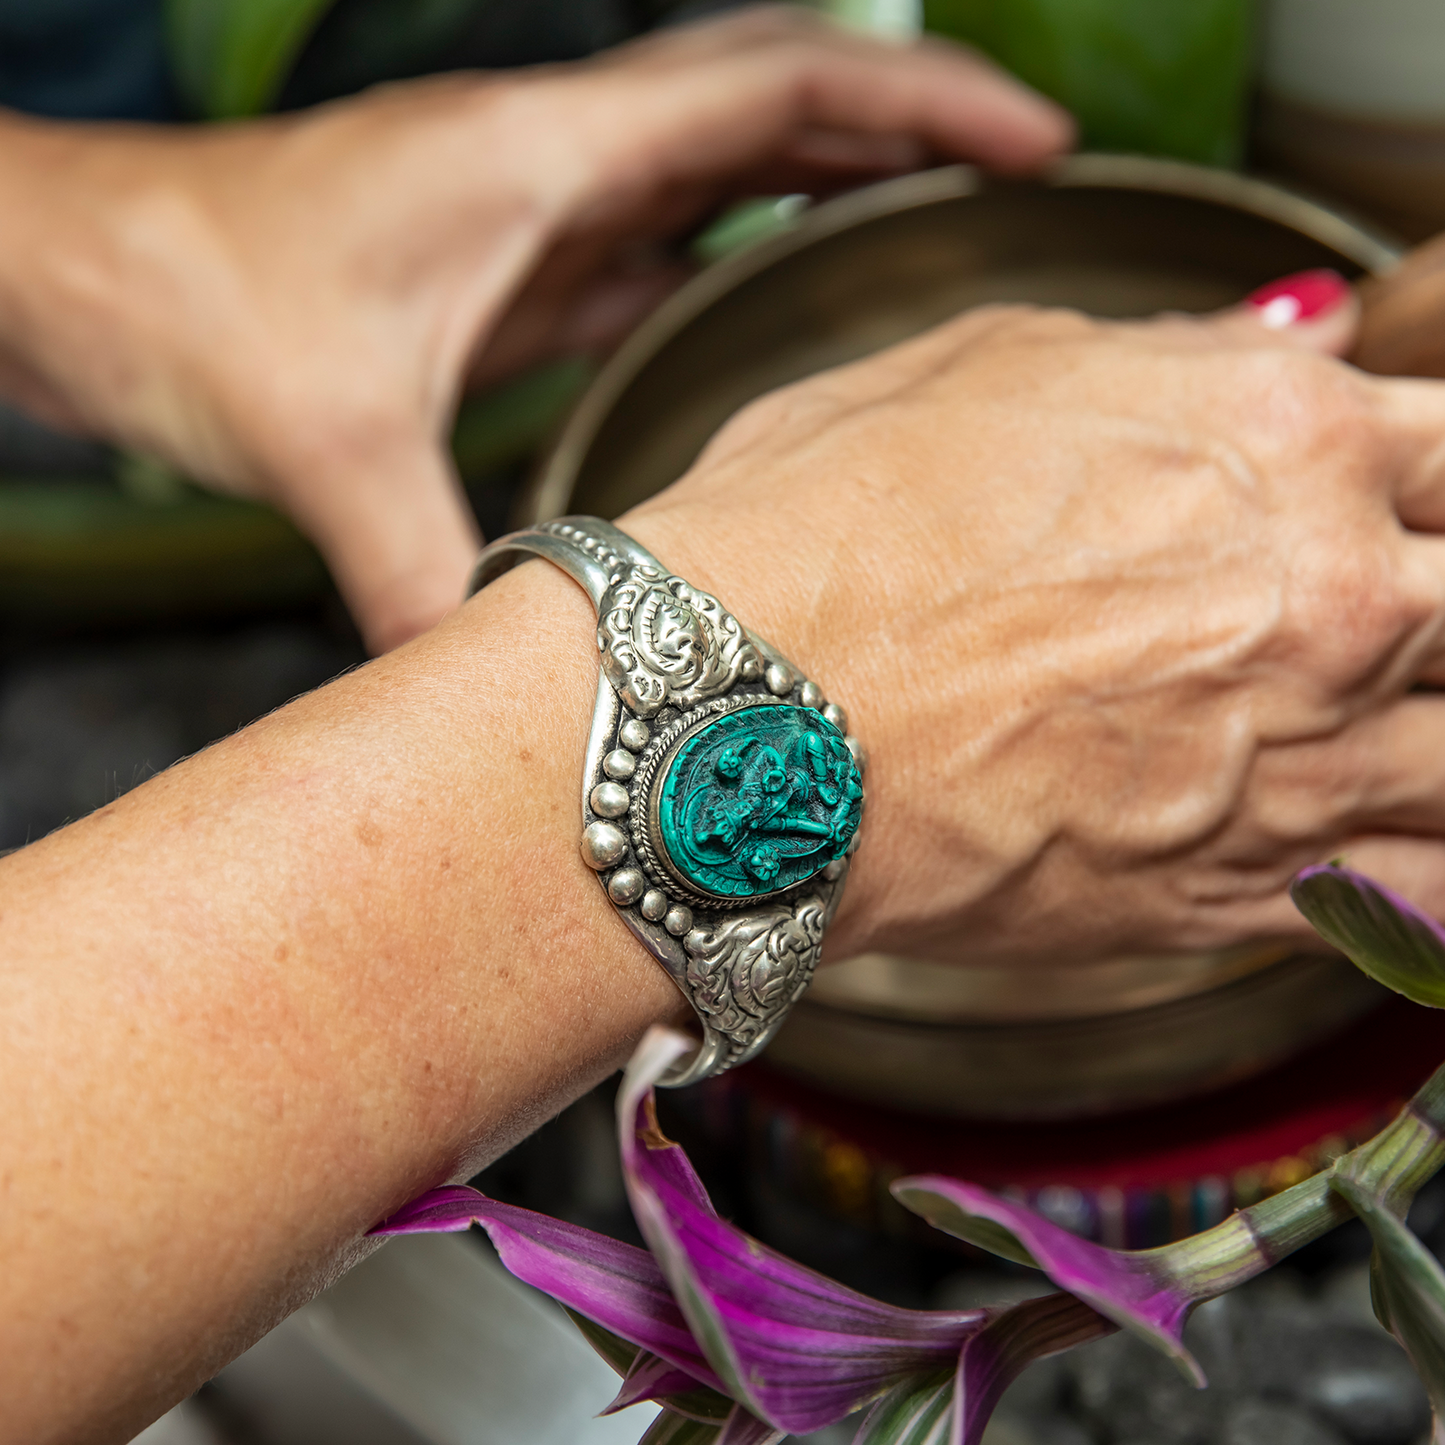 Close-up of Green Tara Cuff Bracelet on a woman's wrist as she reaches for a singing bowl.